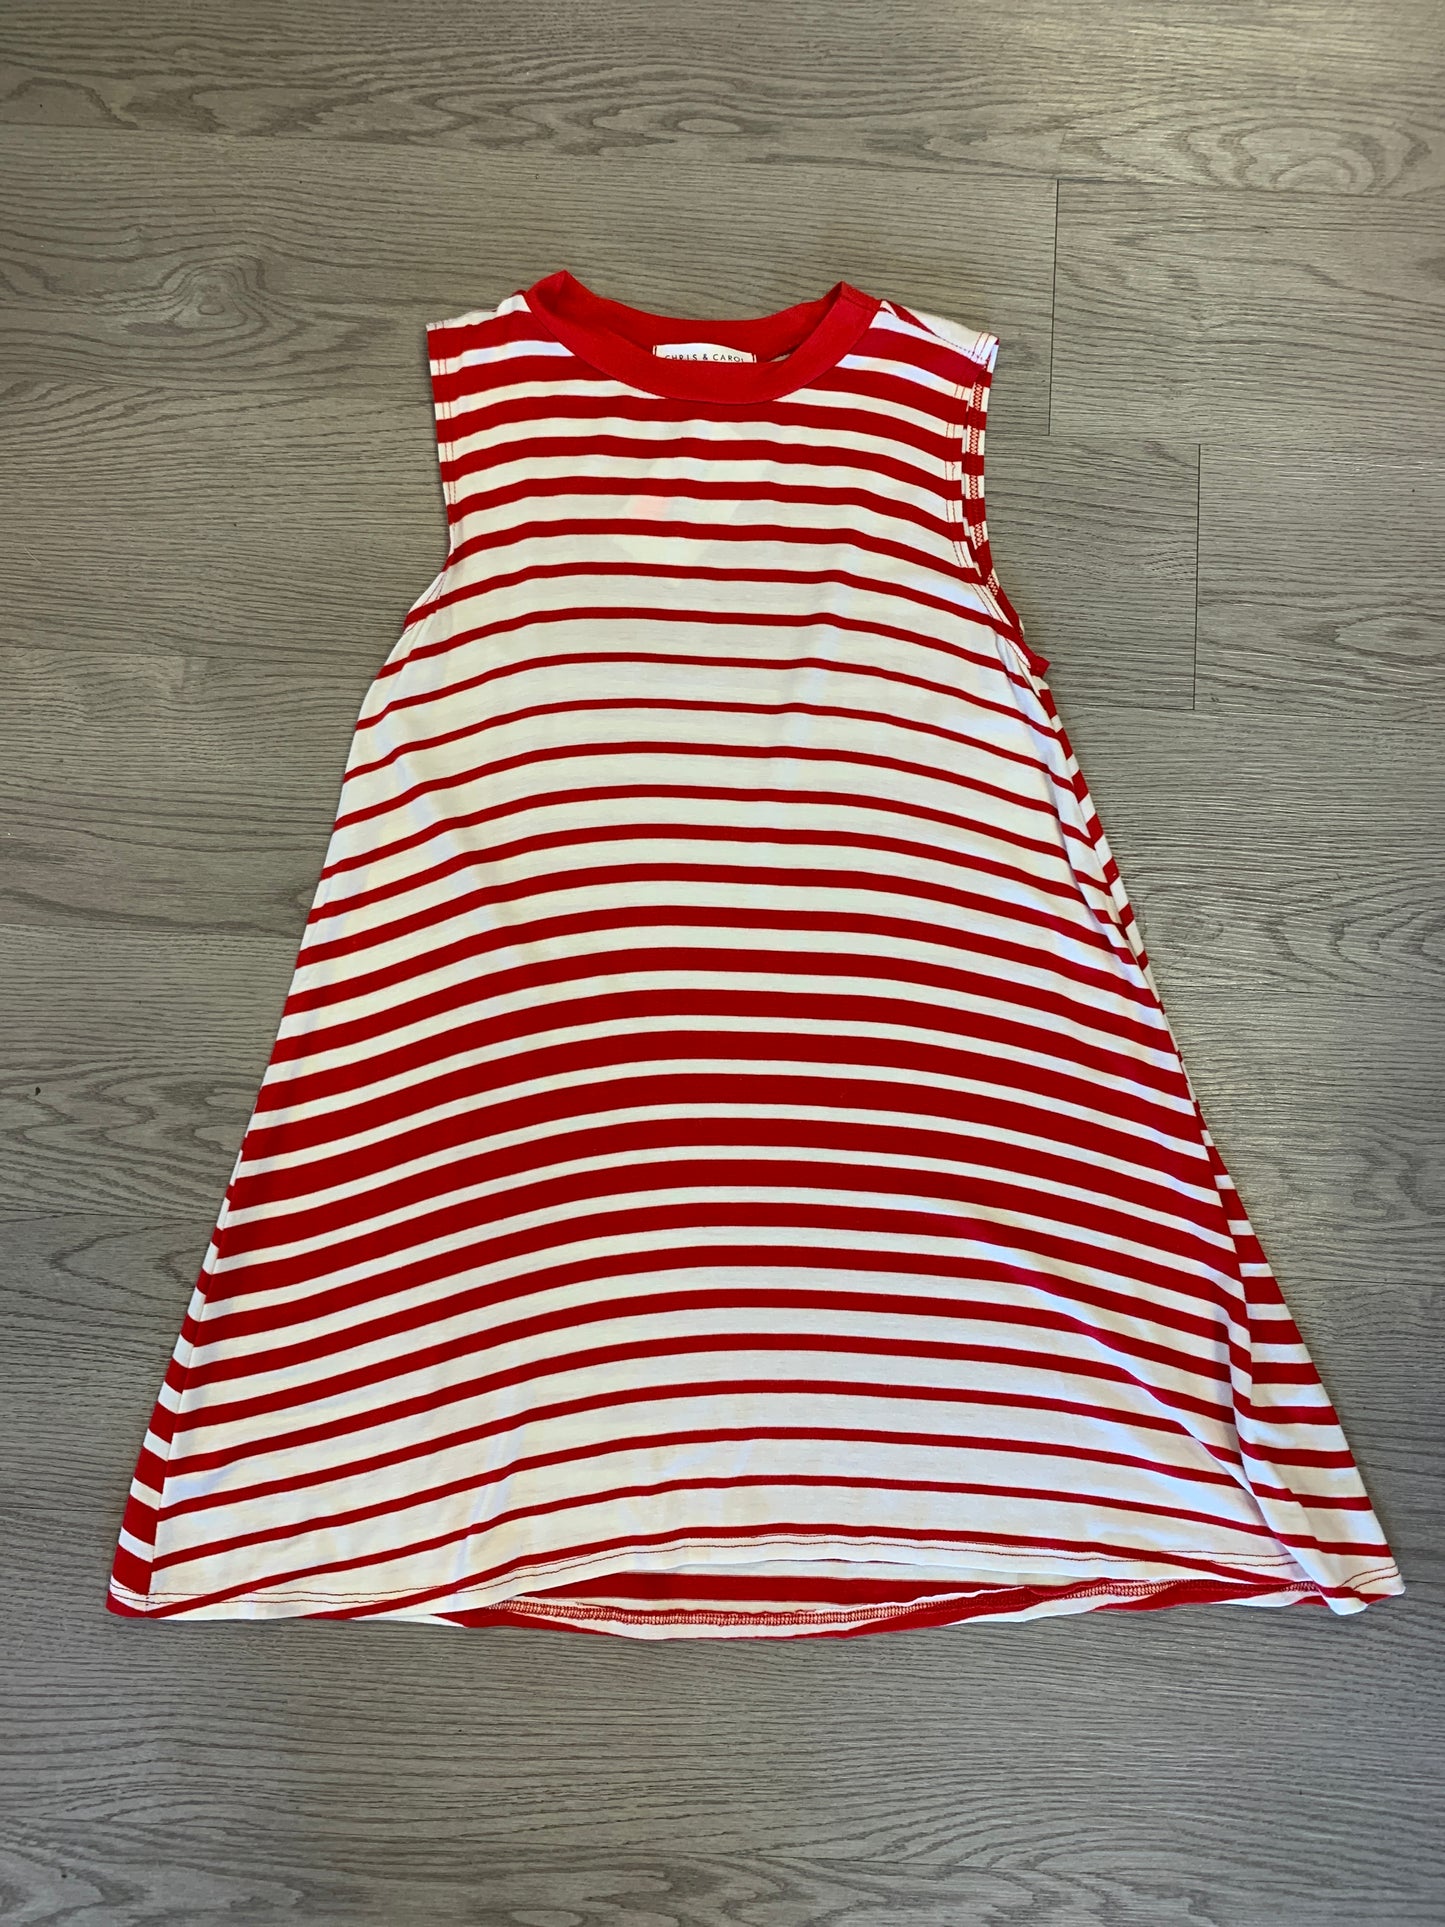 Stripe & sleeveless swing knit top with solid crew neck